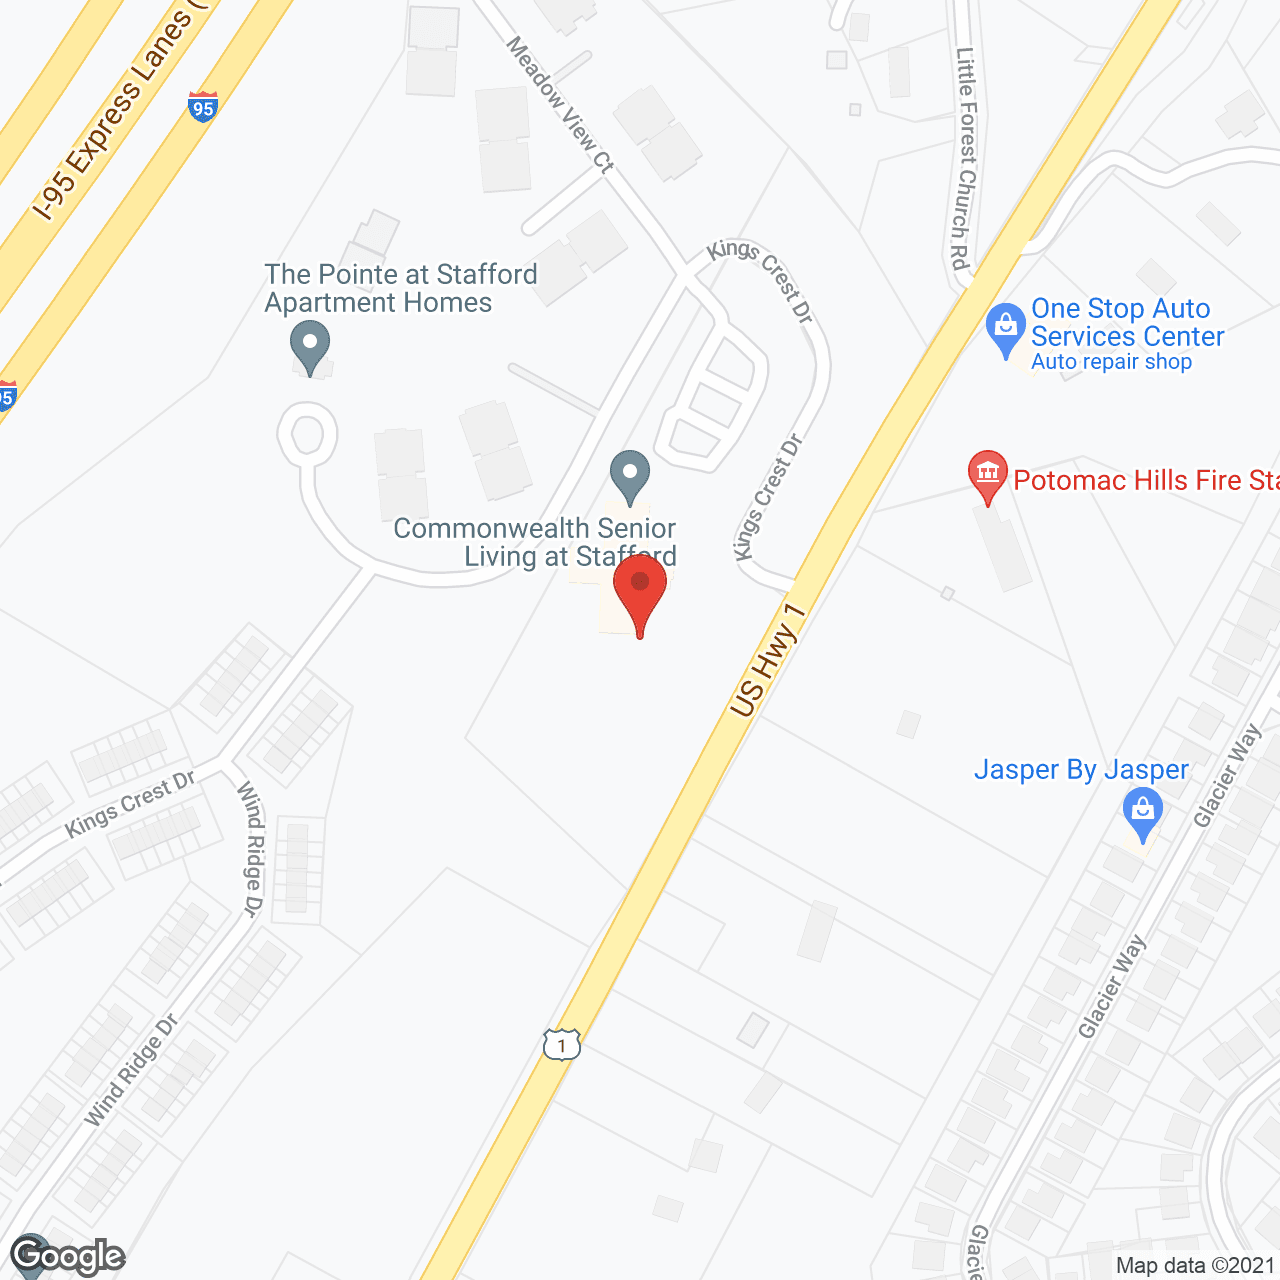 Commonwealth Senior Living at Stafford in google map